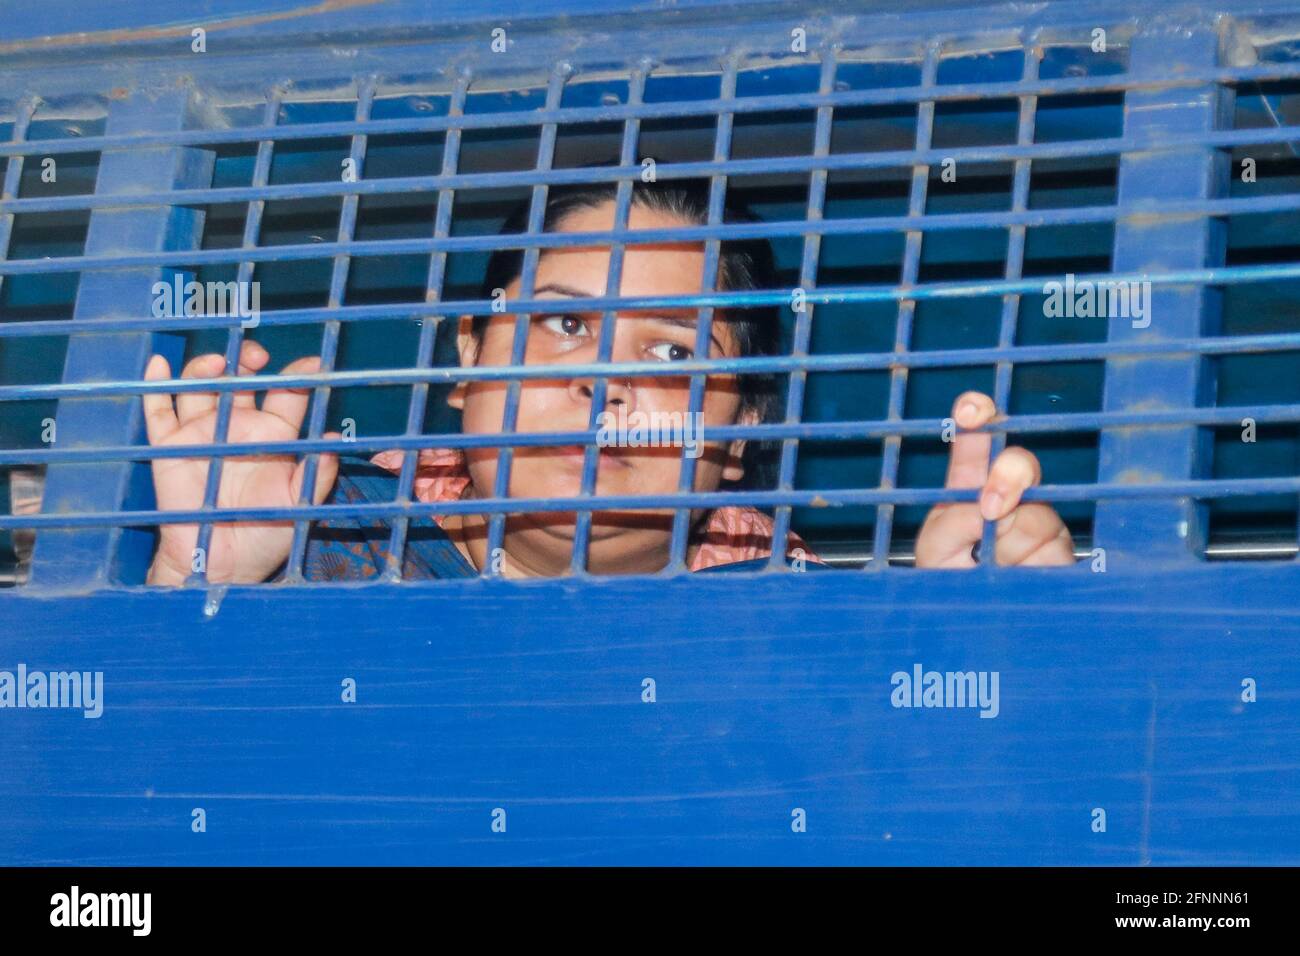 Dhaka, Bangladesh - May 18, 2021: Police take senior journalist Rozina Islam back to prison on May 18, 2021 after a court rejected their petition to i Stock Photo